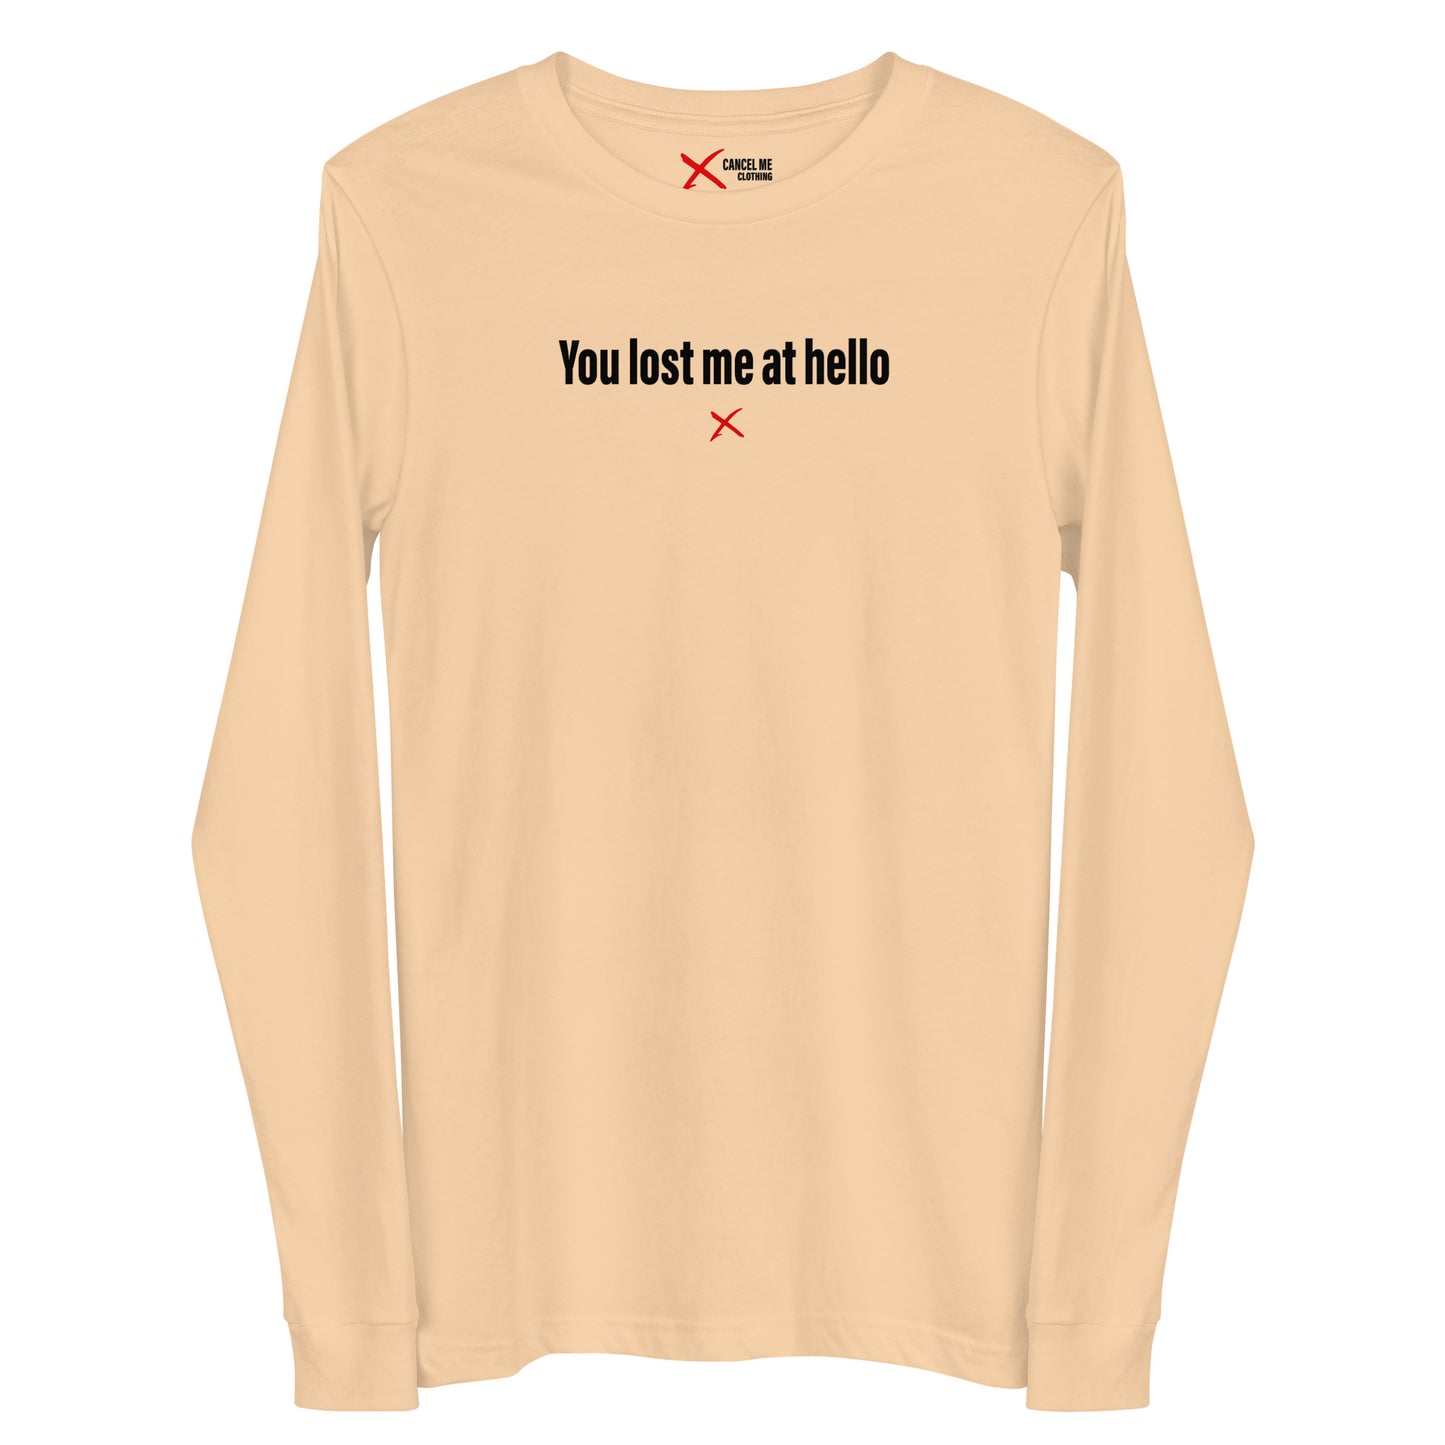 You lost me at hello - Longsleeve